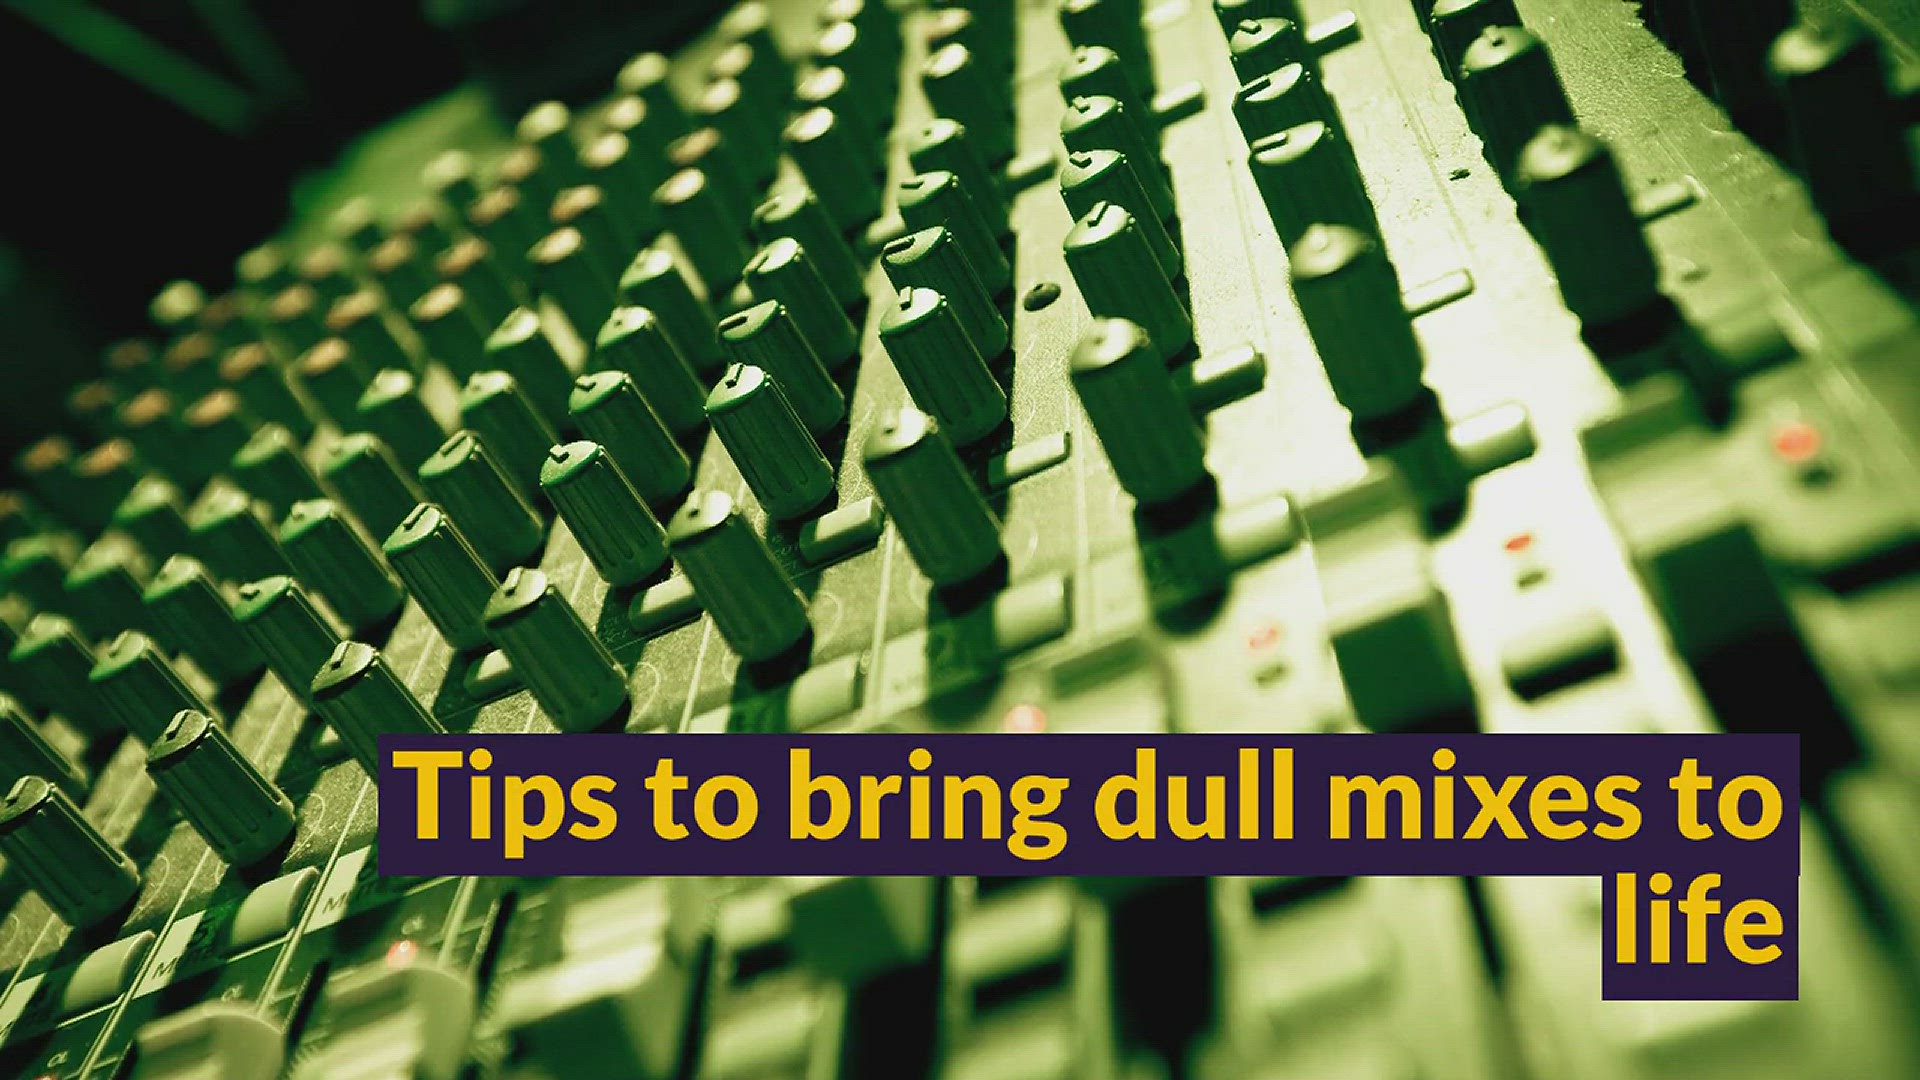 'Video thumbnail for Tips to bring dull mixes to life'